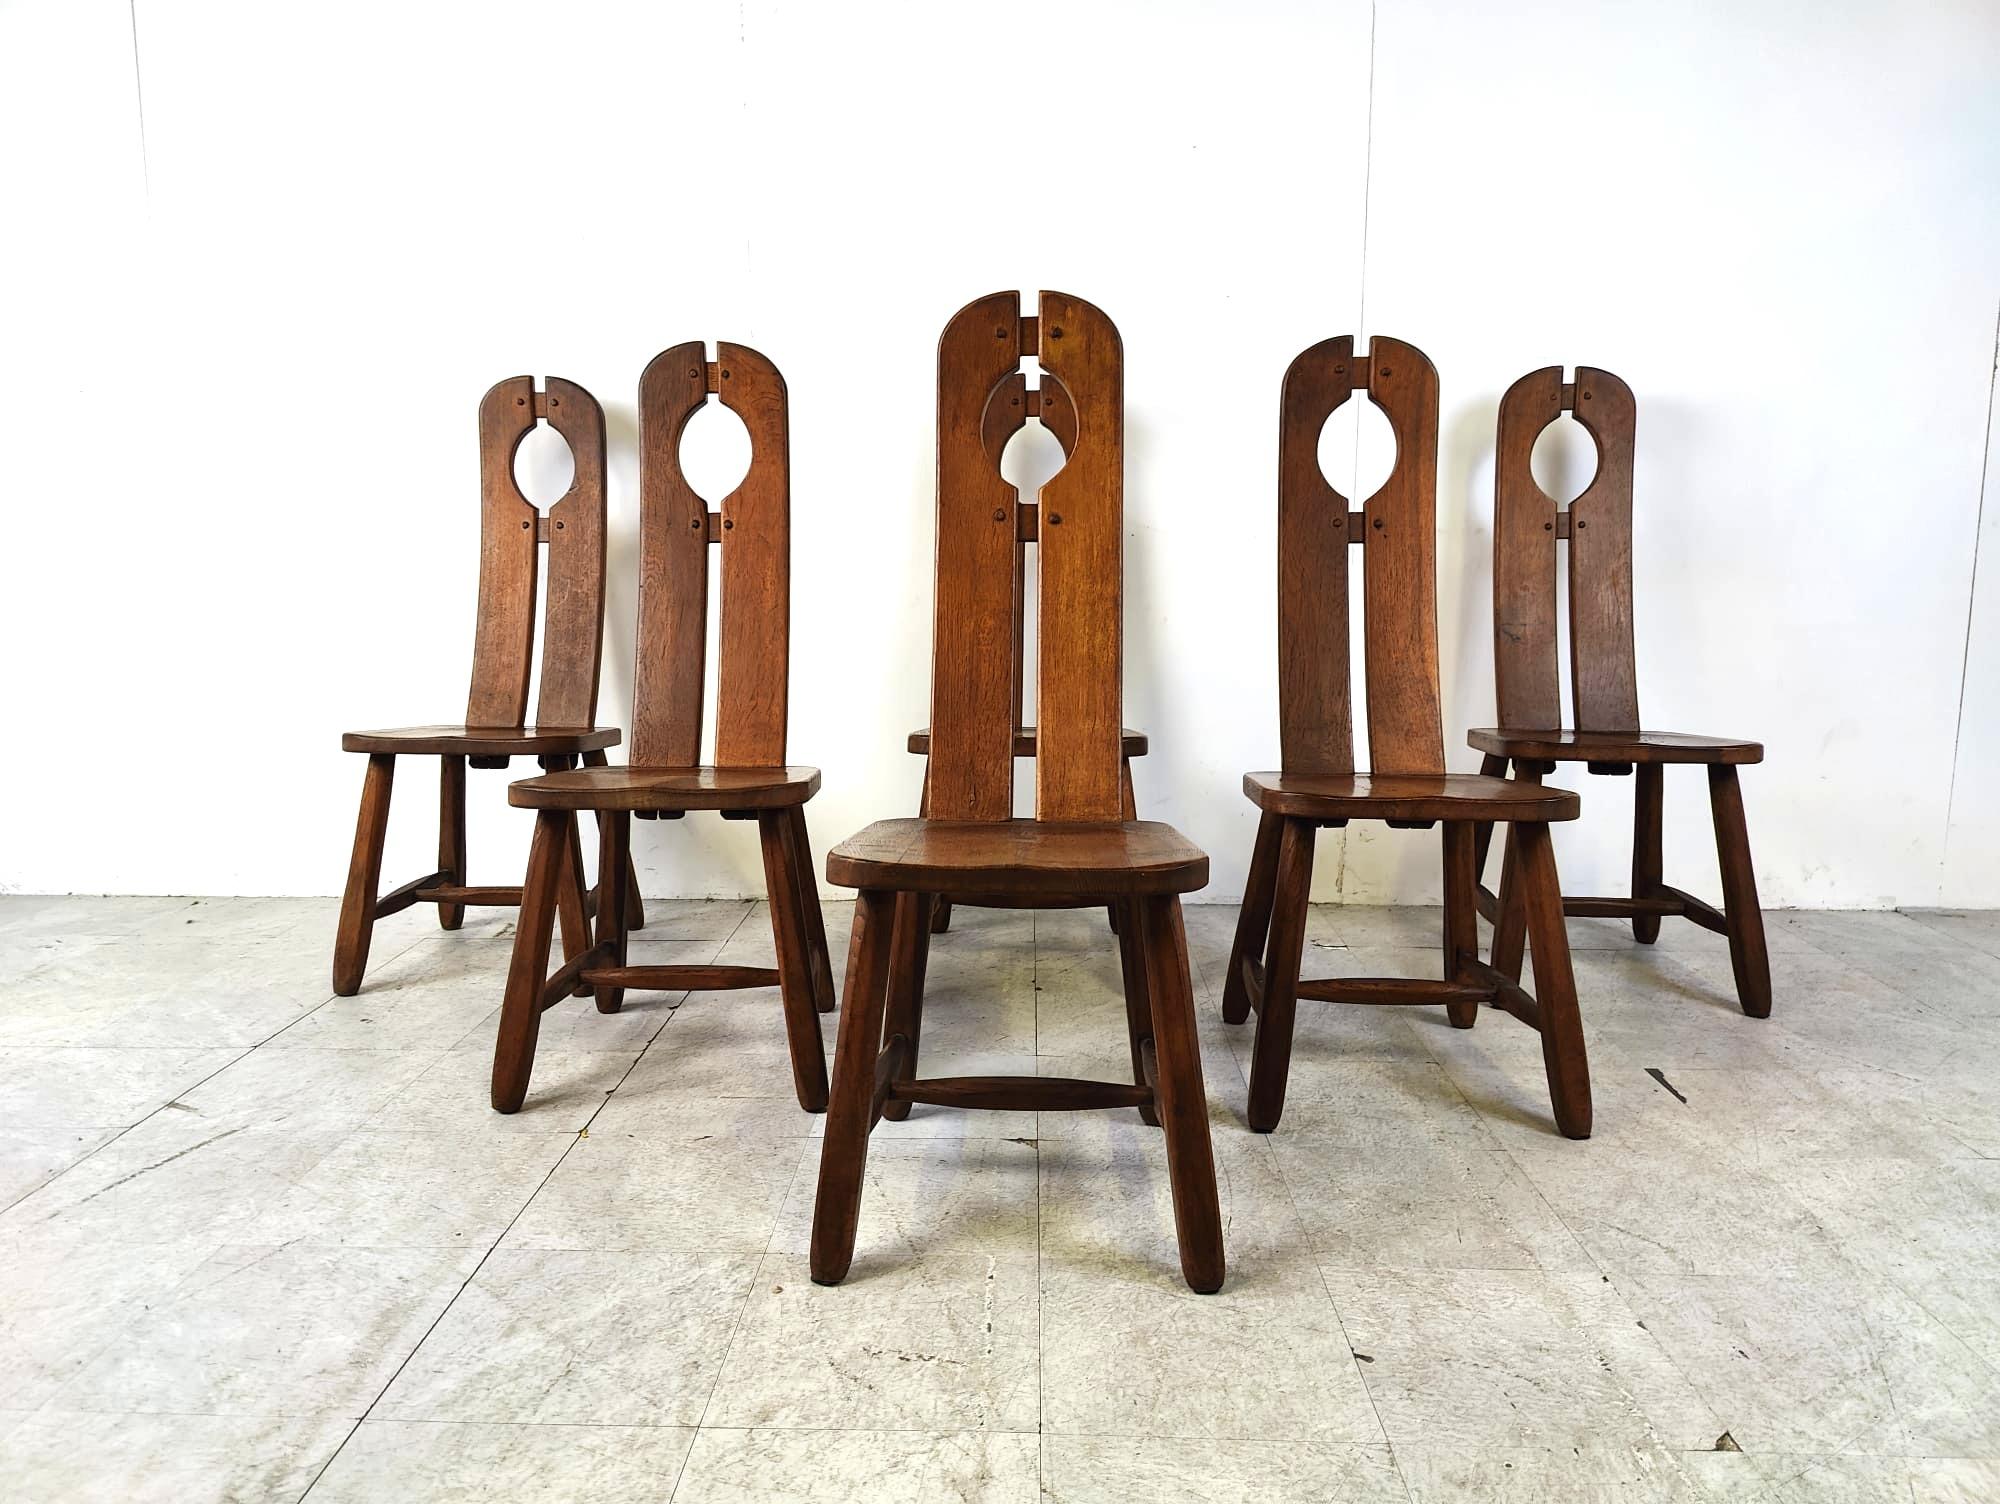 Sturdy and handcrafted dining chairs produced by Depuydt Kunstmeubelen in Belgium.

The chairs are made from solid oak.

Beautiful split backs with interlocking wooden pieces.

These chairs and table will last for ages.

Good condition.

1960s -